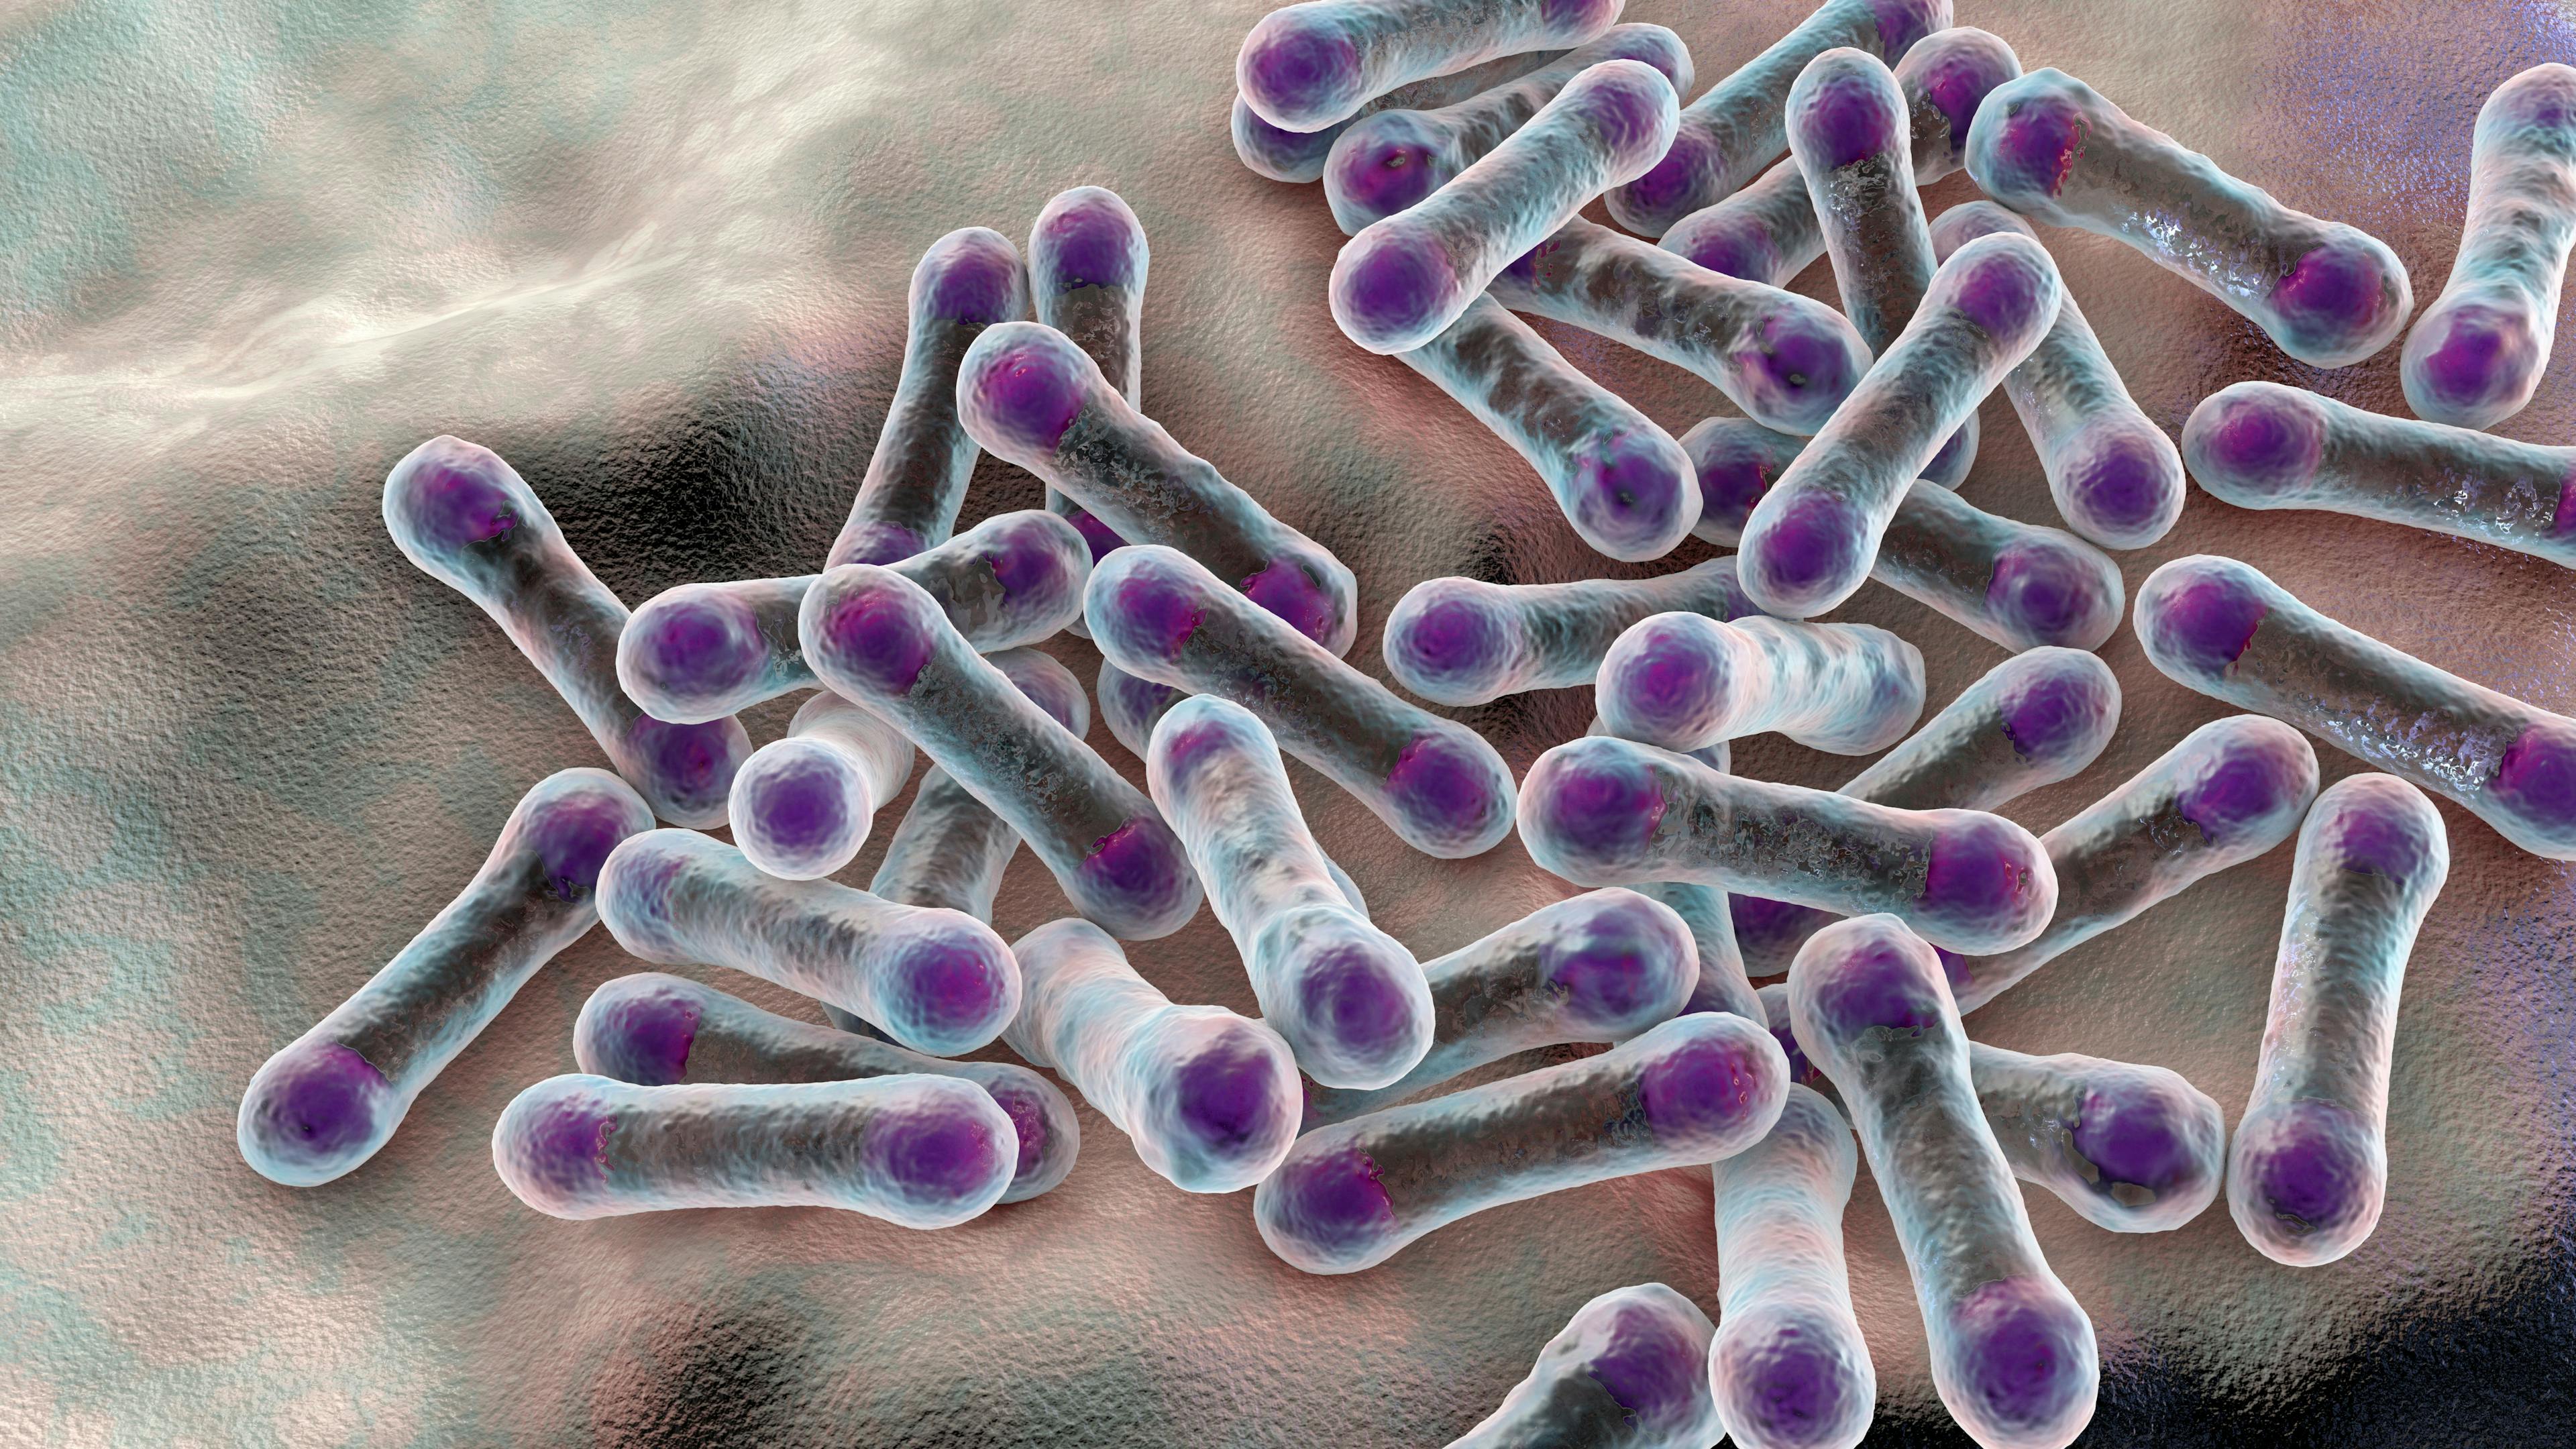 The findings of this study could pave the way for new, disease-targeted probiotics.